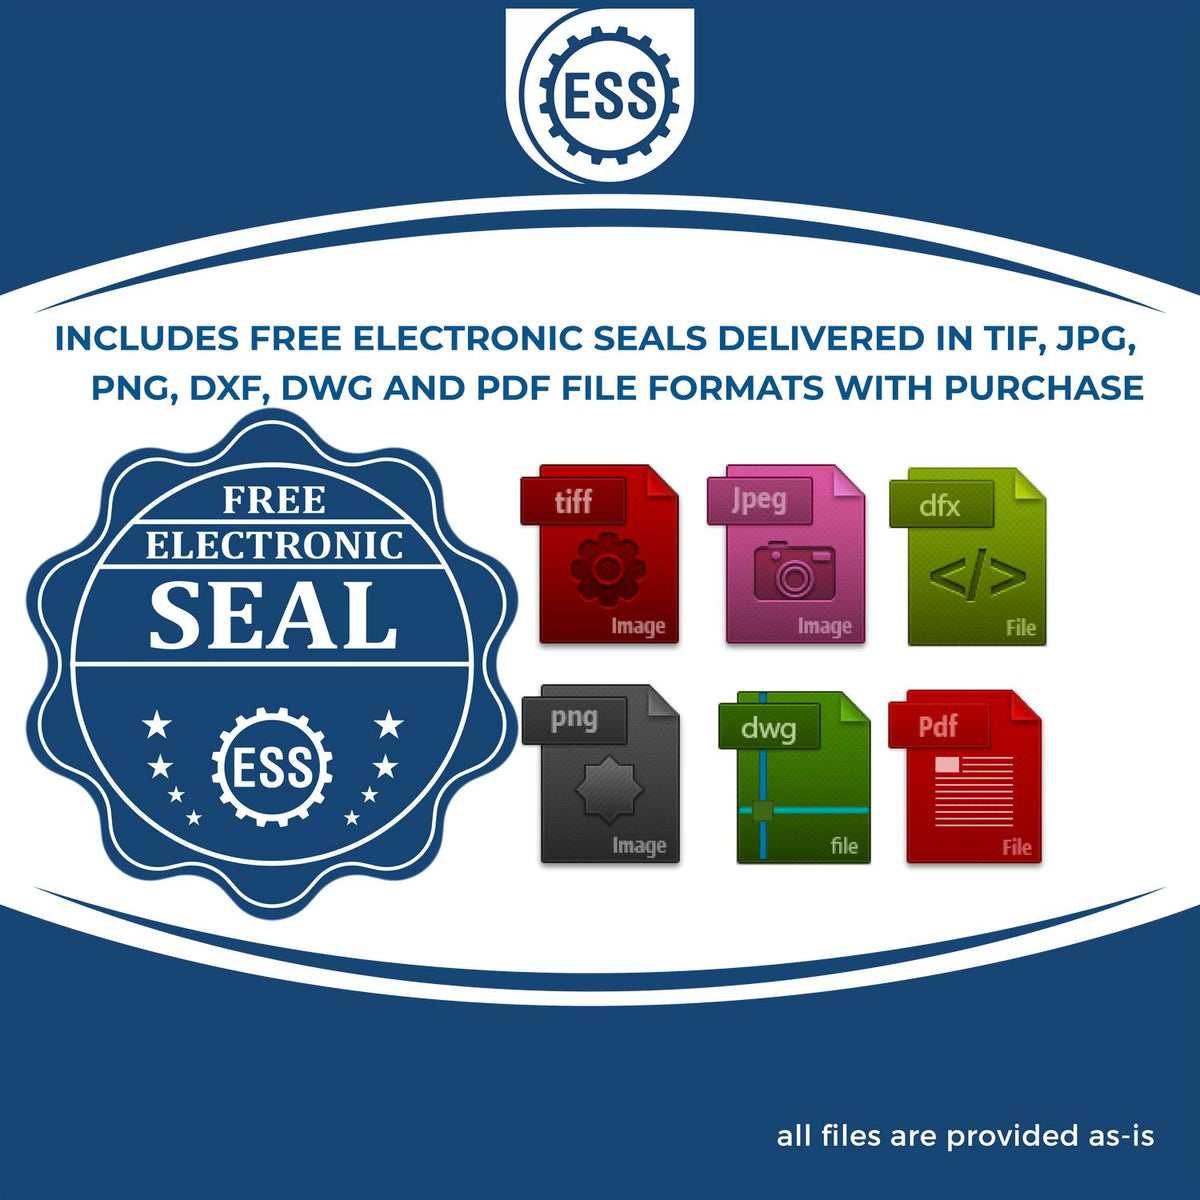 An infographic for the free electronic seal for the Slim Pre-Inked Louisiana Landscape Architect Seal Stamp illustrating the different file type icons such as DXF, DWG, TIF, JPG and PNG.